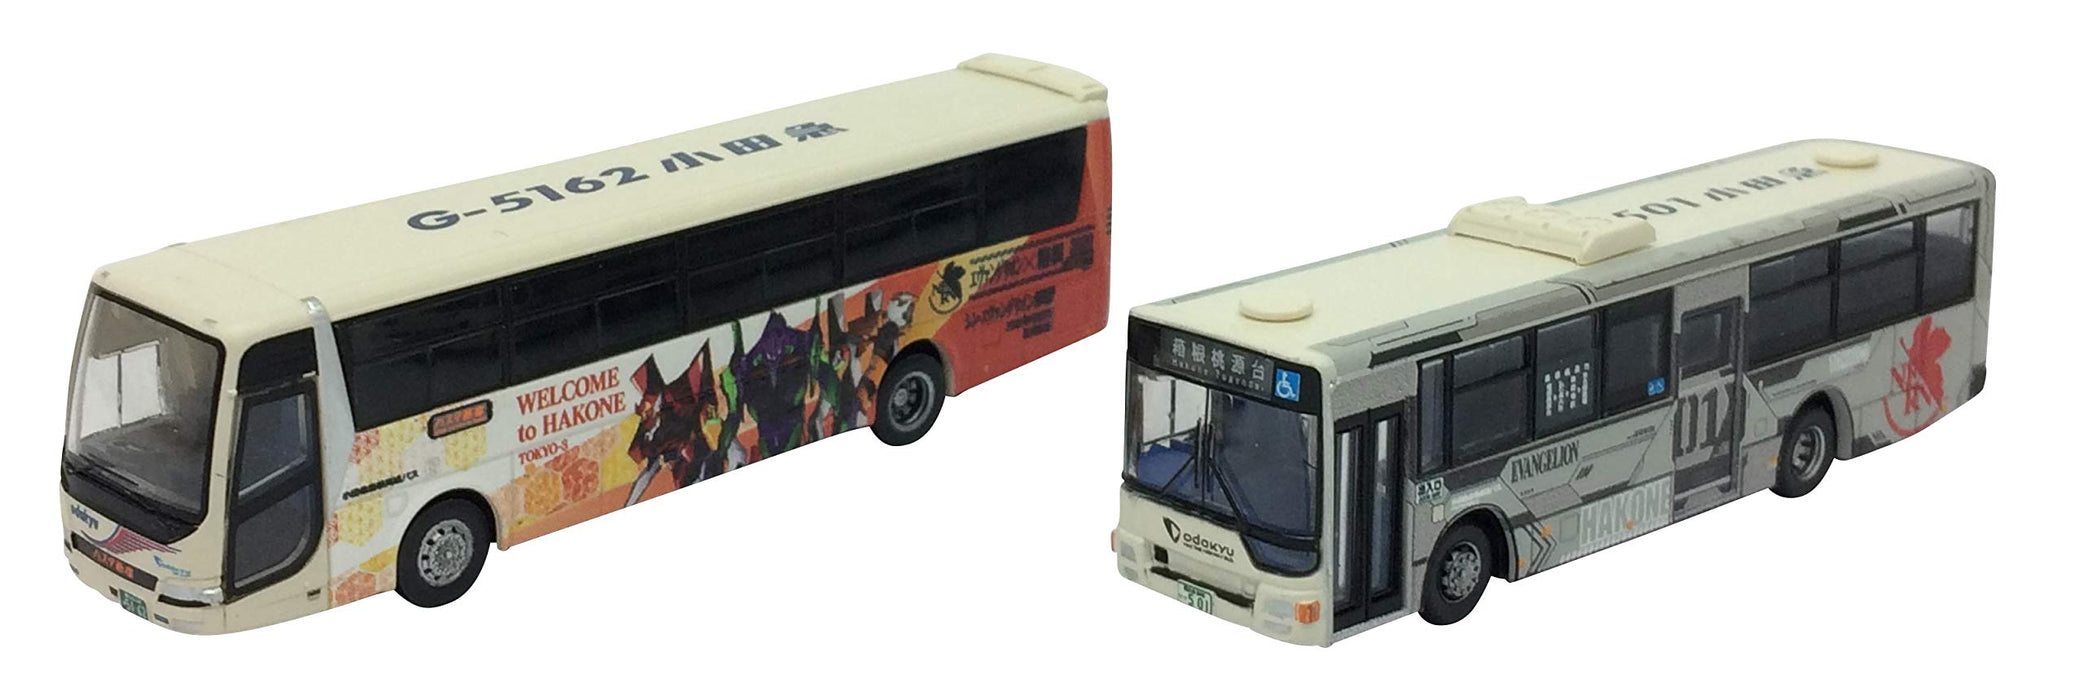 Tomytec Bus Collection - Odakyu Hakone Highway Bus Evangelion Wrapping Set of 2 Limited Edition